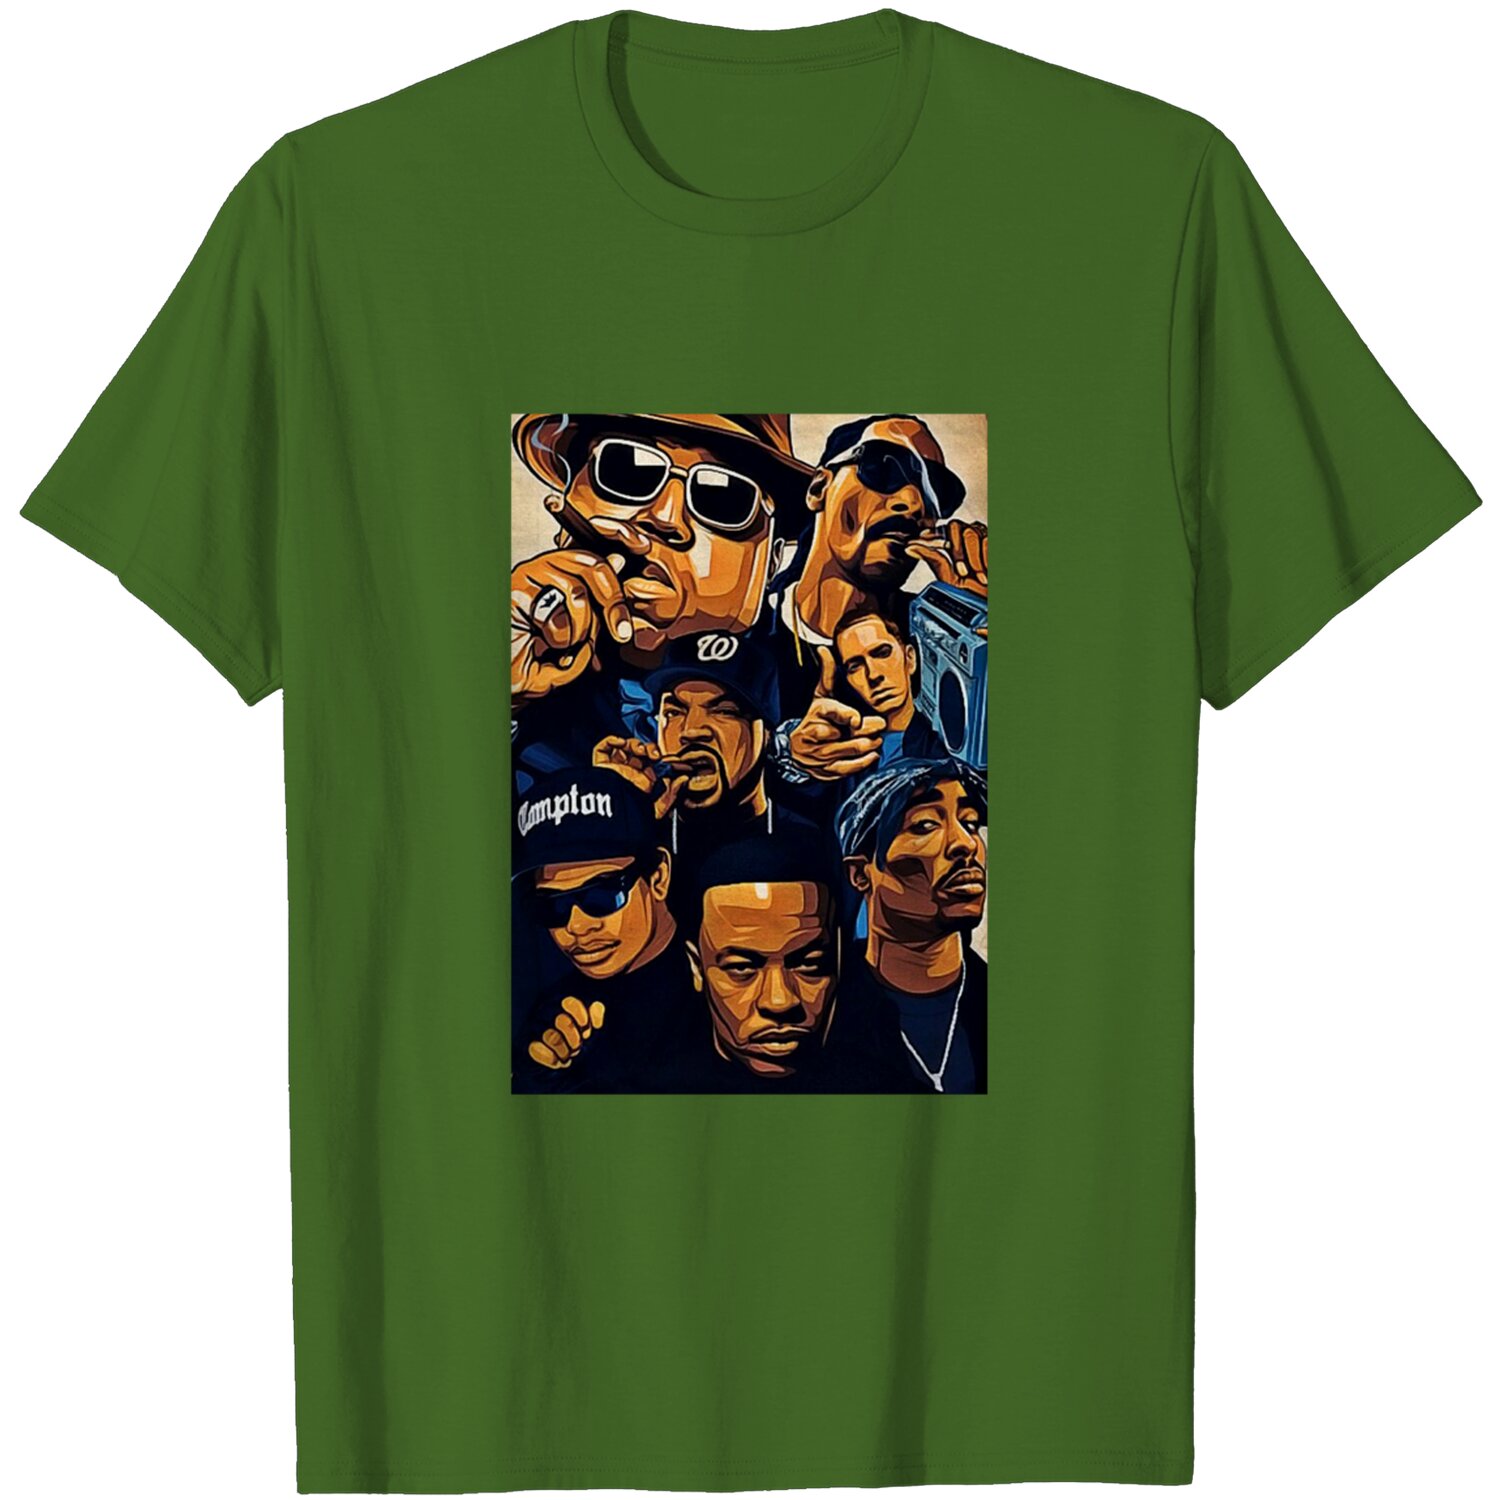 Hip Hop Legends All Together Graphic Tee featuring Snoop Dogg DZT